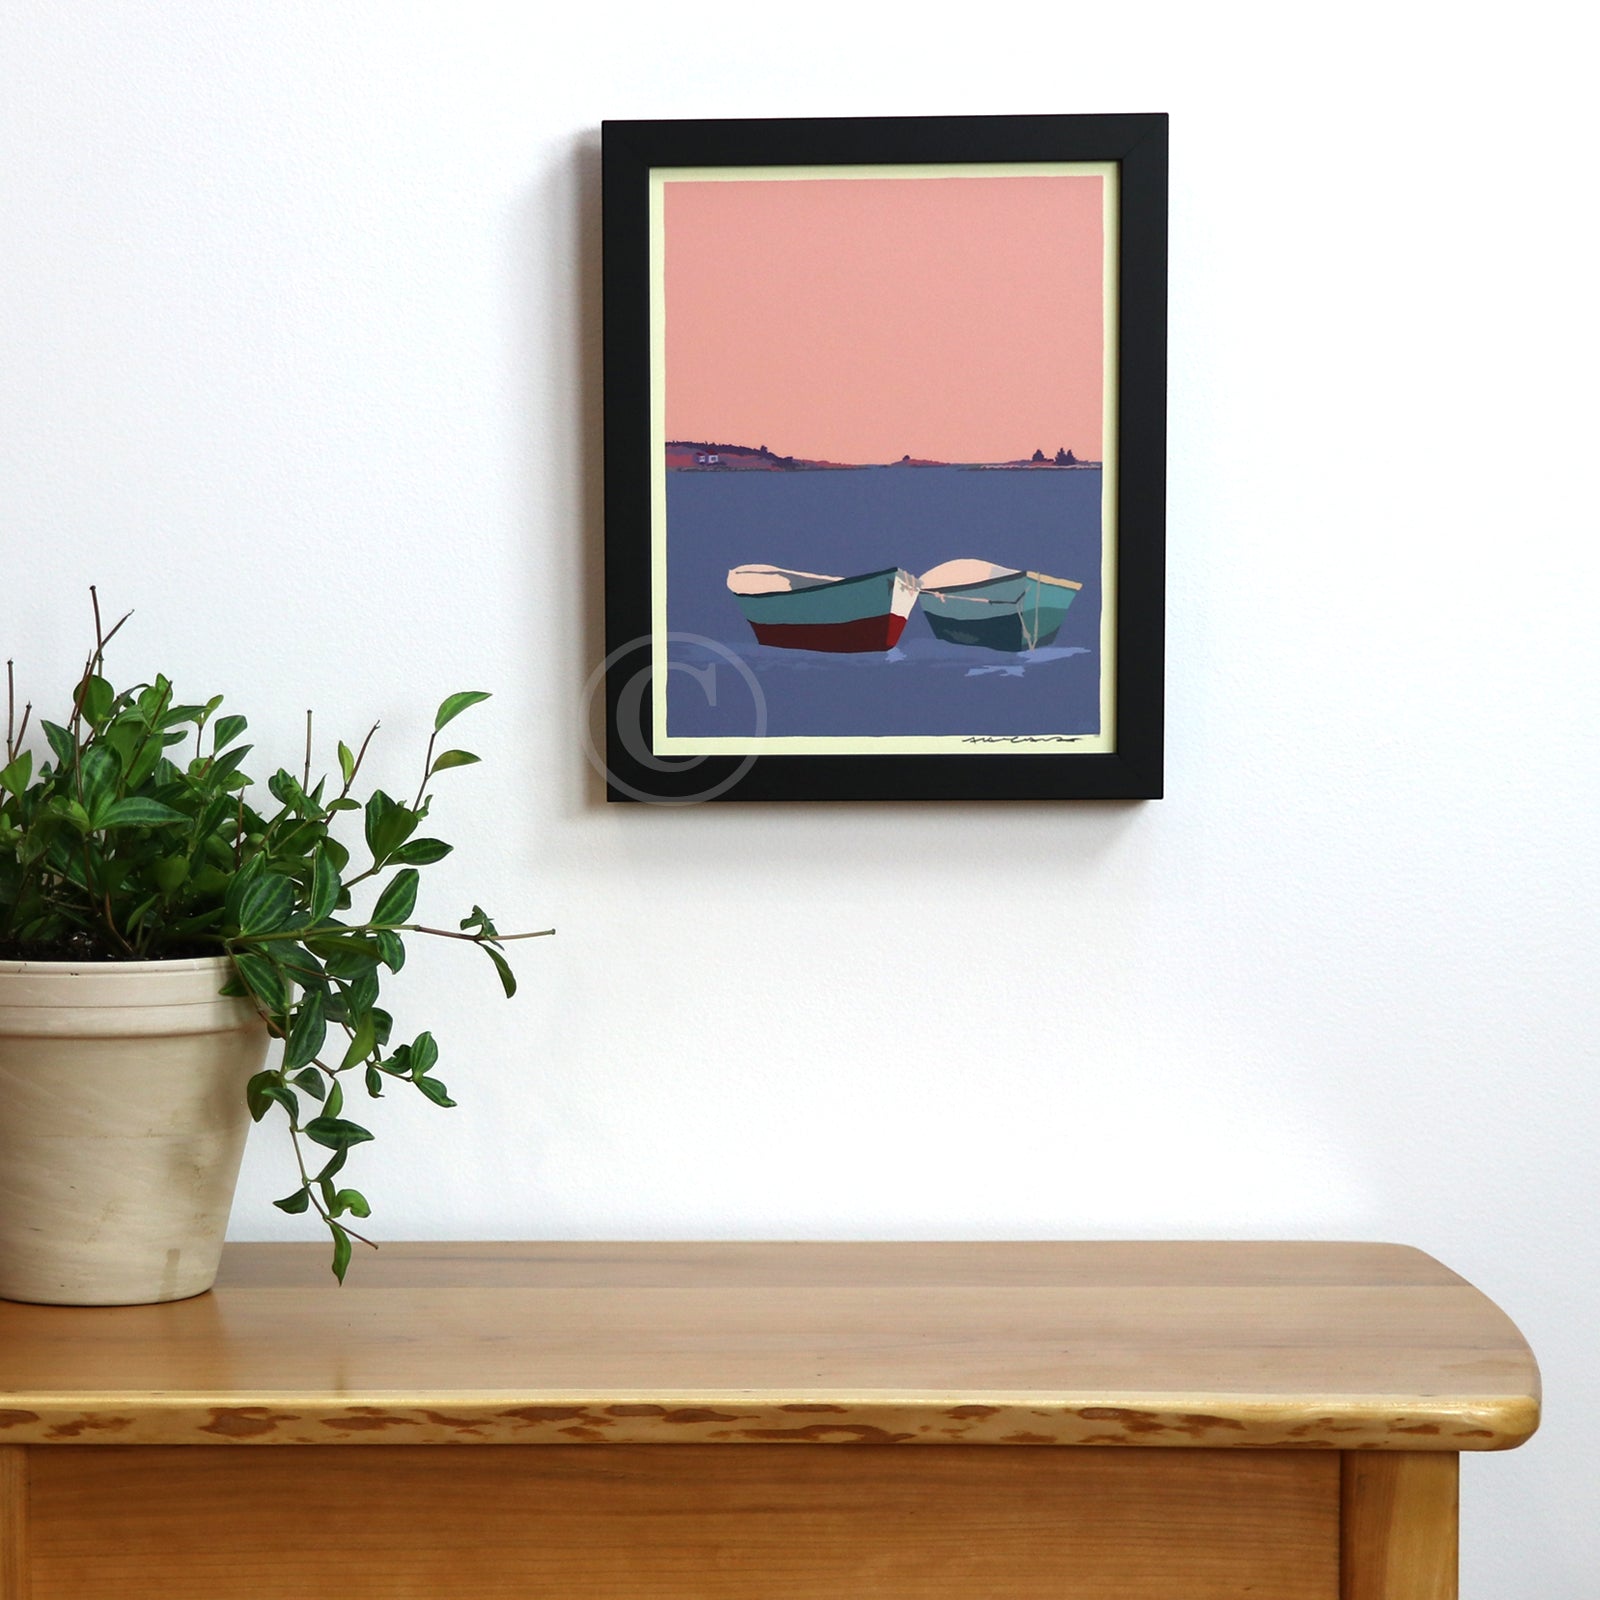 Love Boats in Maine Art Print 8" x 10" Framed Wall Poster By Alan Claude - Maine